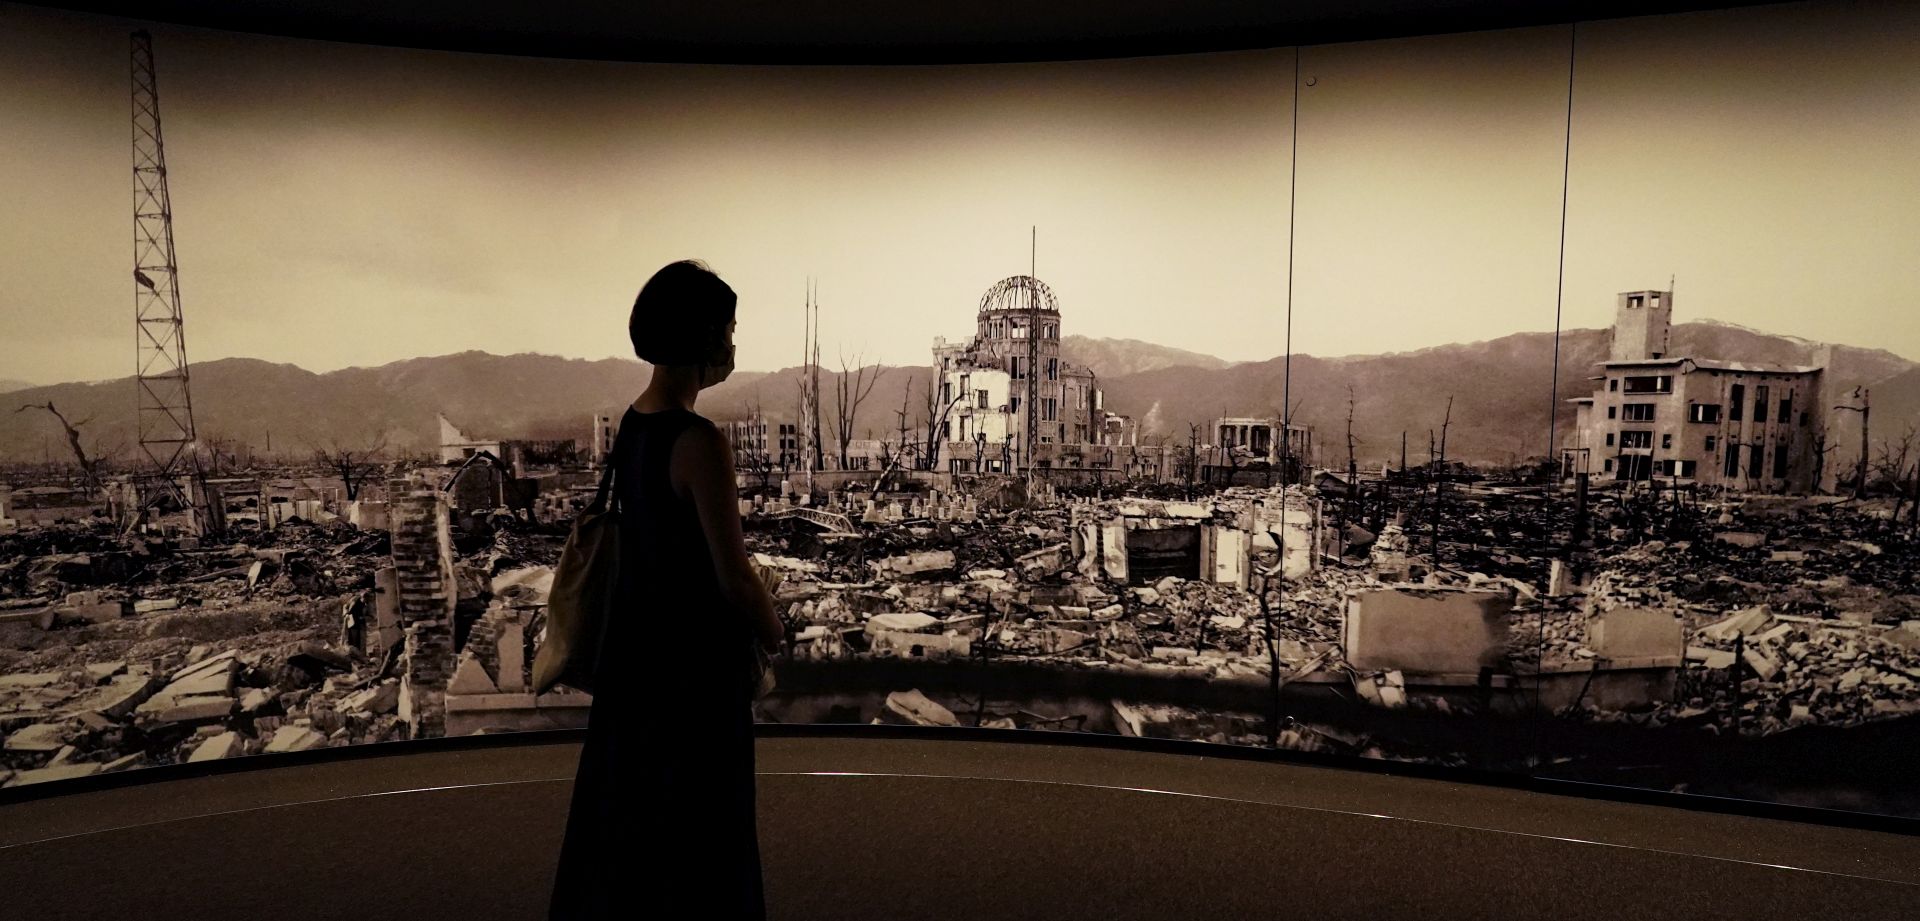 epa08584665 A visitor looks at photographs of the Hiroshima bombing aftermath, at the Hiroshima Peace Memorial Museum in Hiroshima, Japan, 05 August 2020. On 06 August 2020 Japan will mark the 75th anniversary of the bombing of Hiroshima. In 1945 the United States dropped two nuclear bombs over the cities of Hiroshima and Nagasaki on 06 and 09 August respectively, killing more than 200,000 people. This year’s annual commemoration events were either canceled or scaled down amid the ongoing coronavirus pandemic.  EPA/DAI KUROKAWA